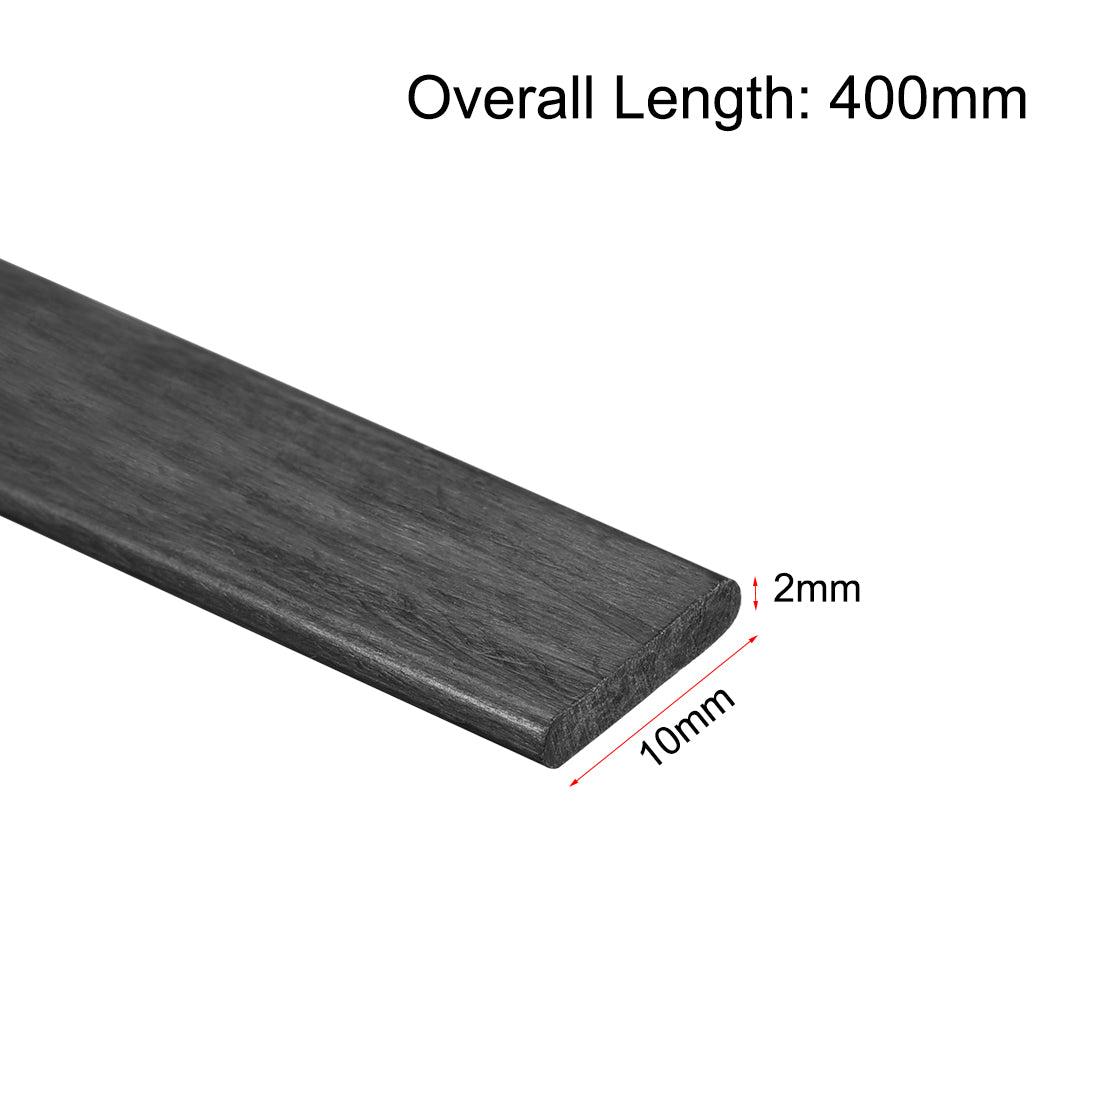 uxcell Uxcell Carbon Fiber Strip Bars 2x10mm 400mm Length Pultruded Carbon Fiber Strips for Kites, RC Airplane 1 Pcs